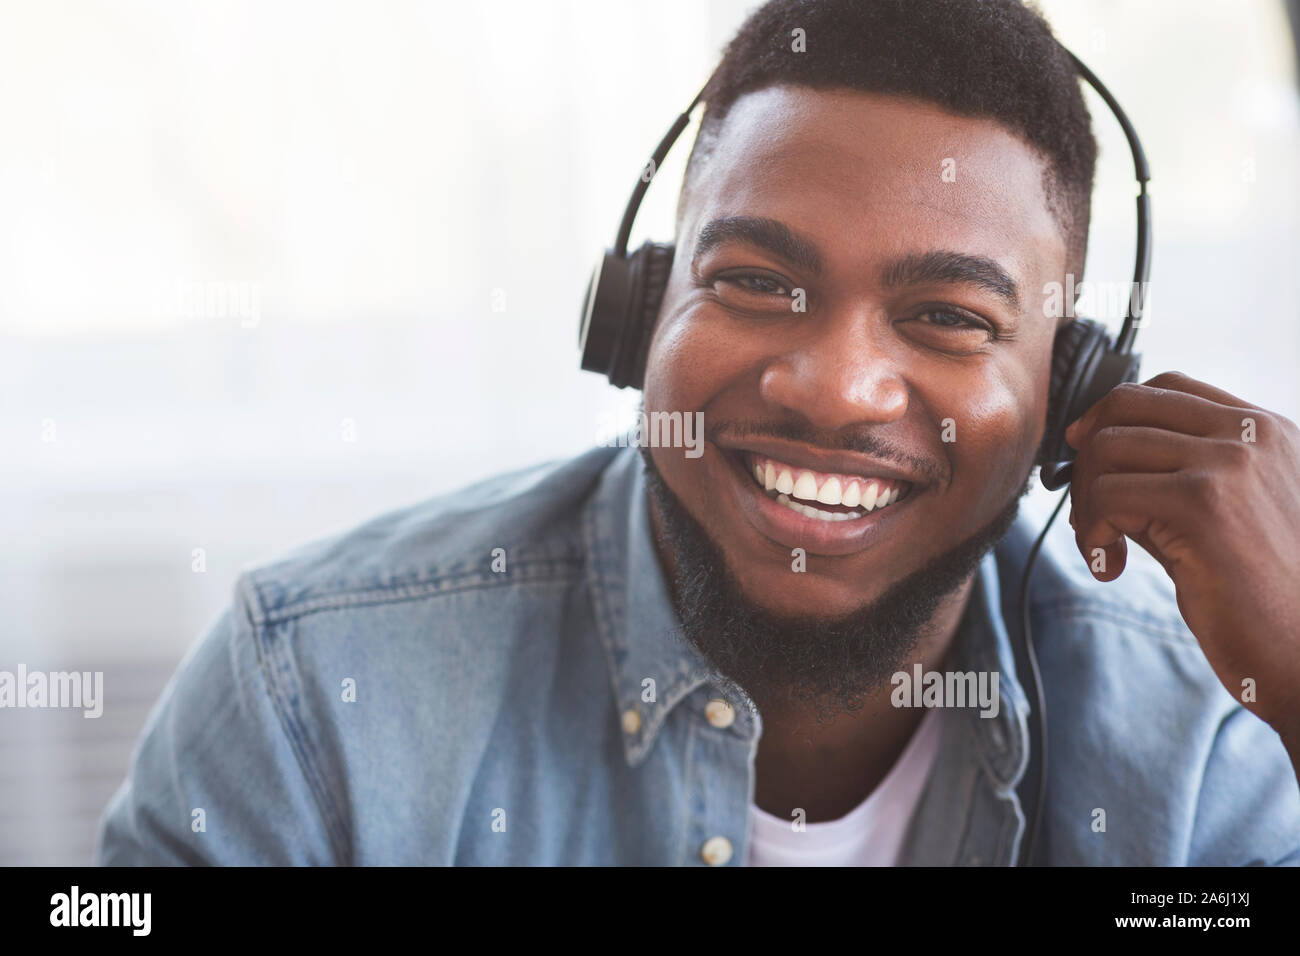 Portrait of smiling black call center operator in headset Stock Photo